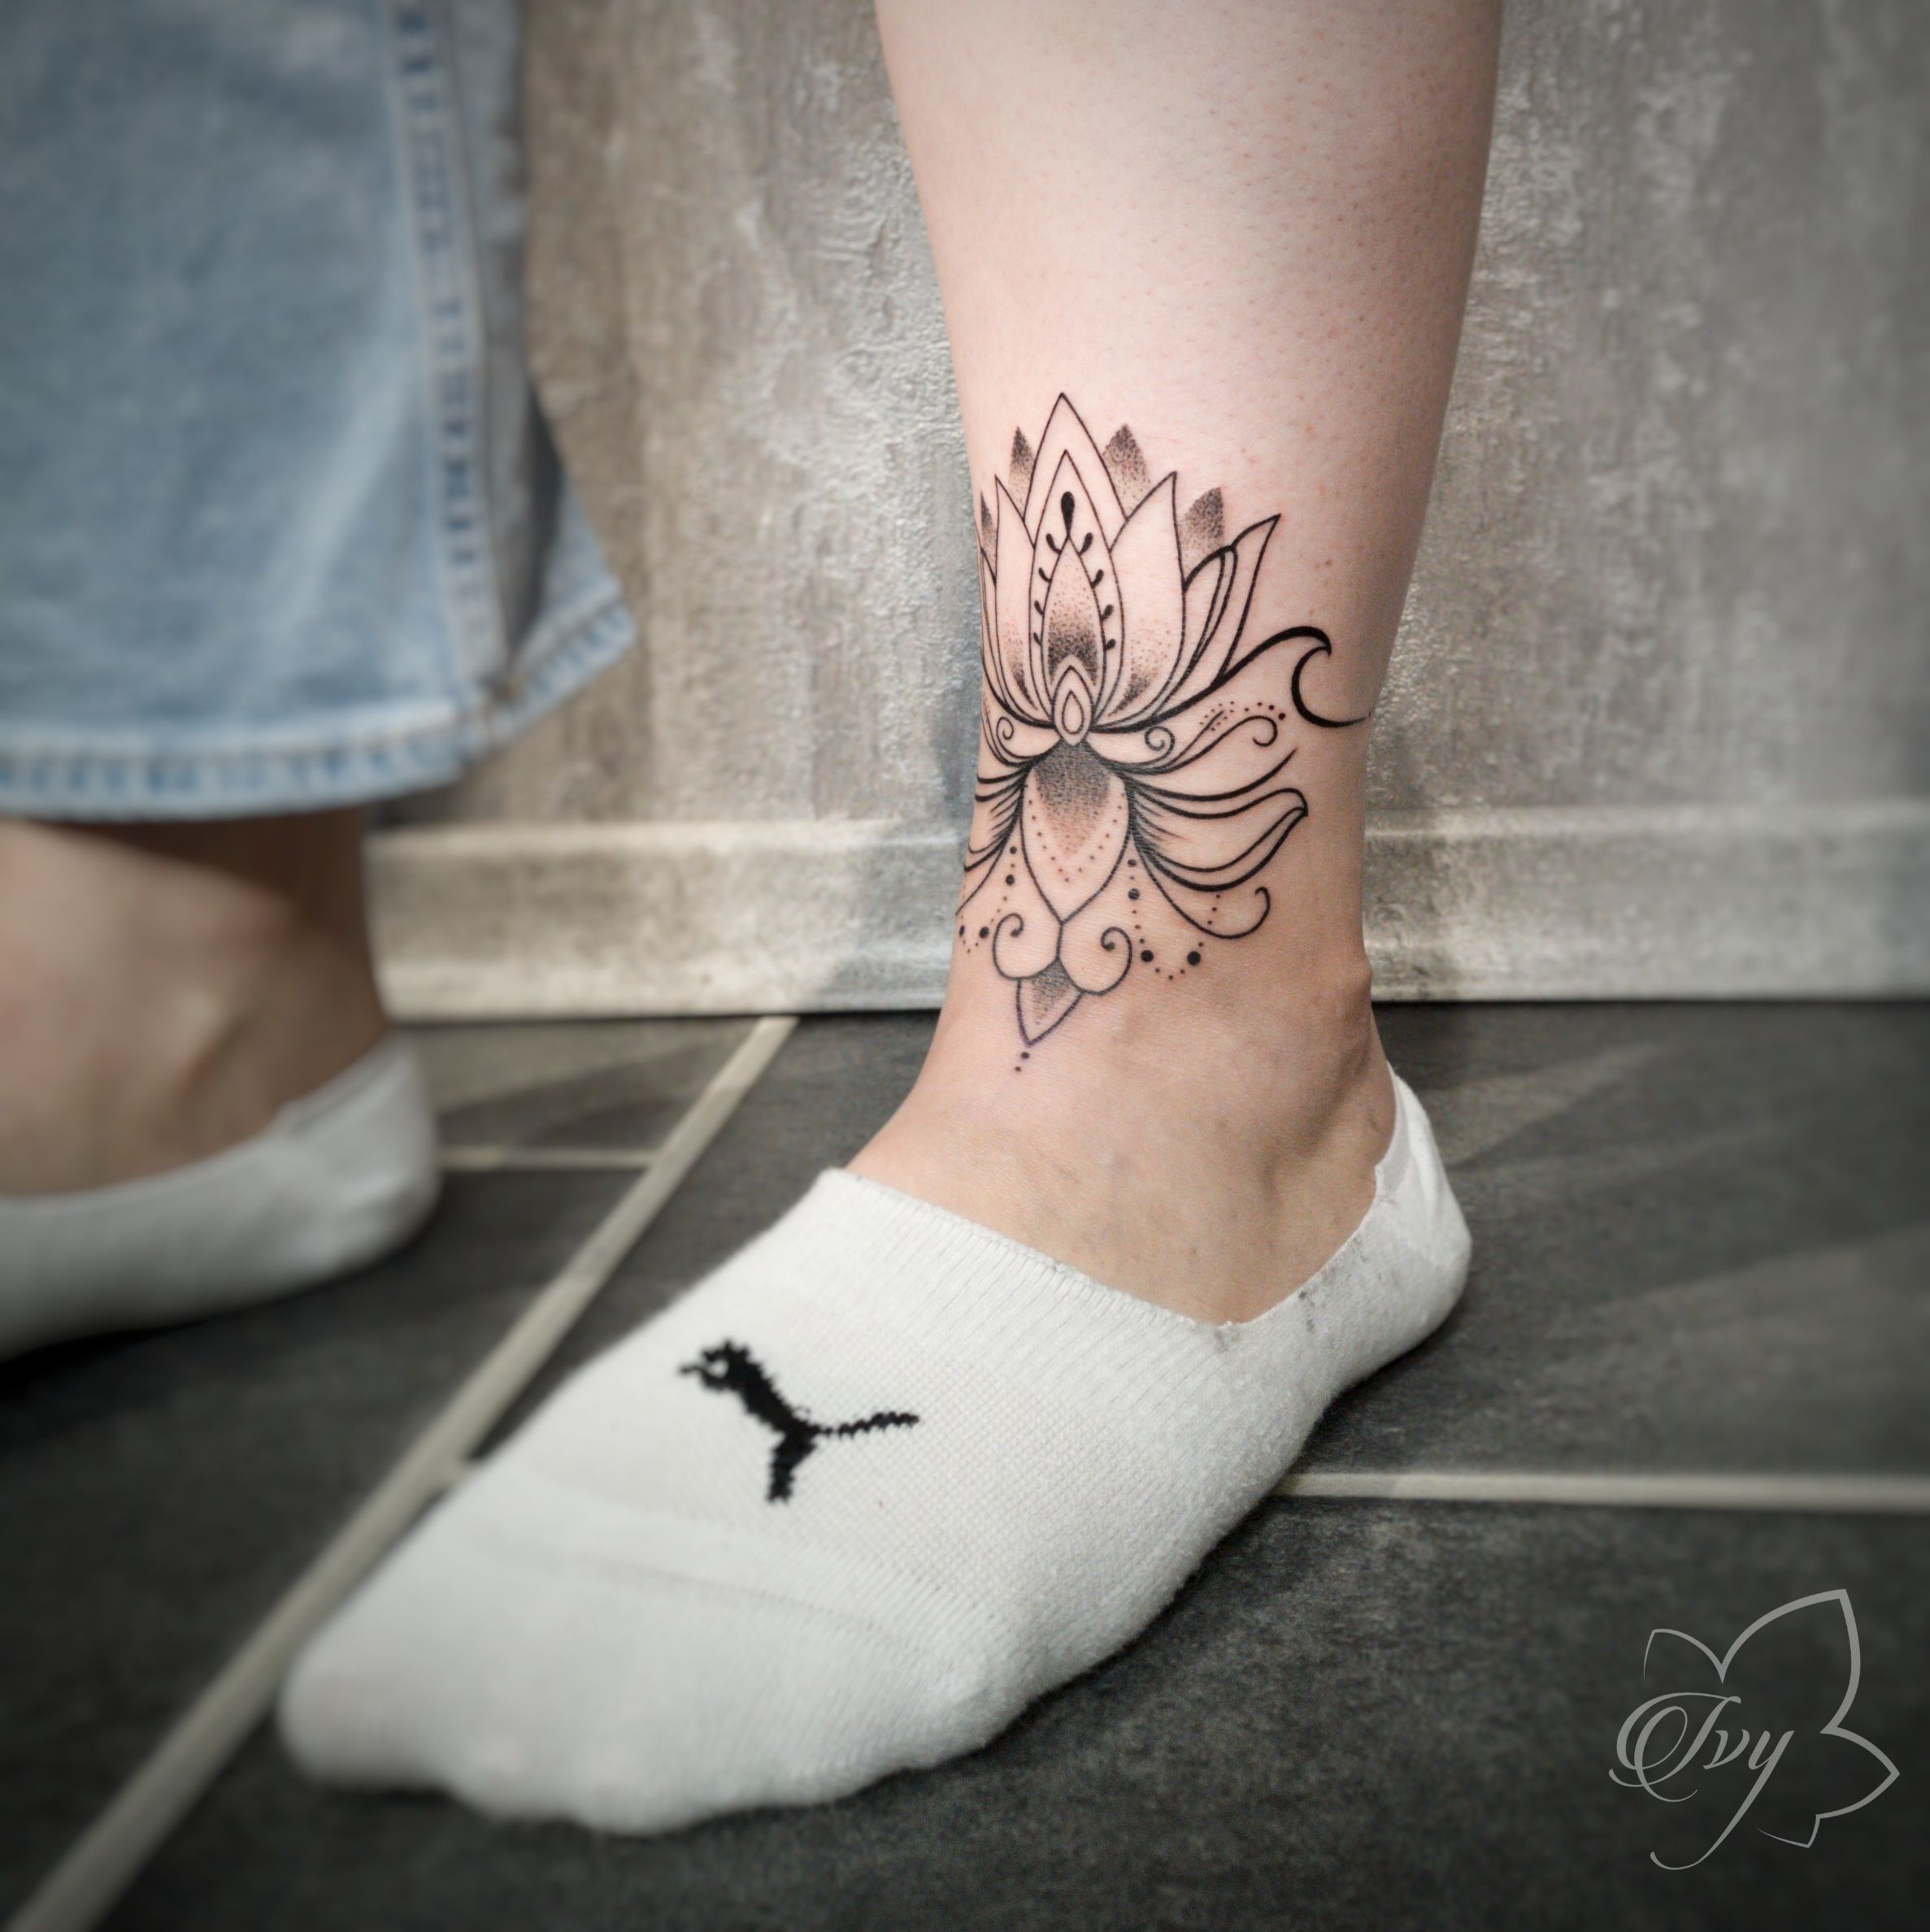 Foot Tattoo Ideas To Sweep You Off Your Feet  Stories and Ink